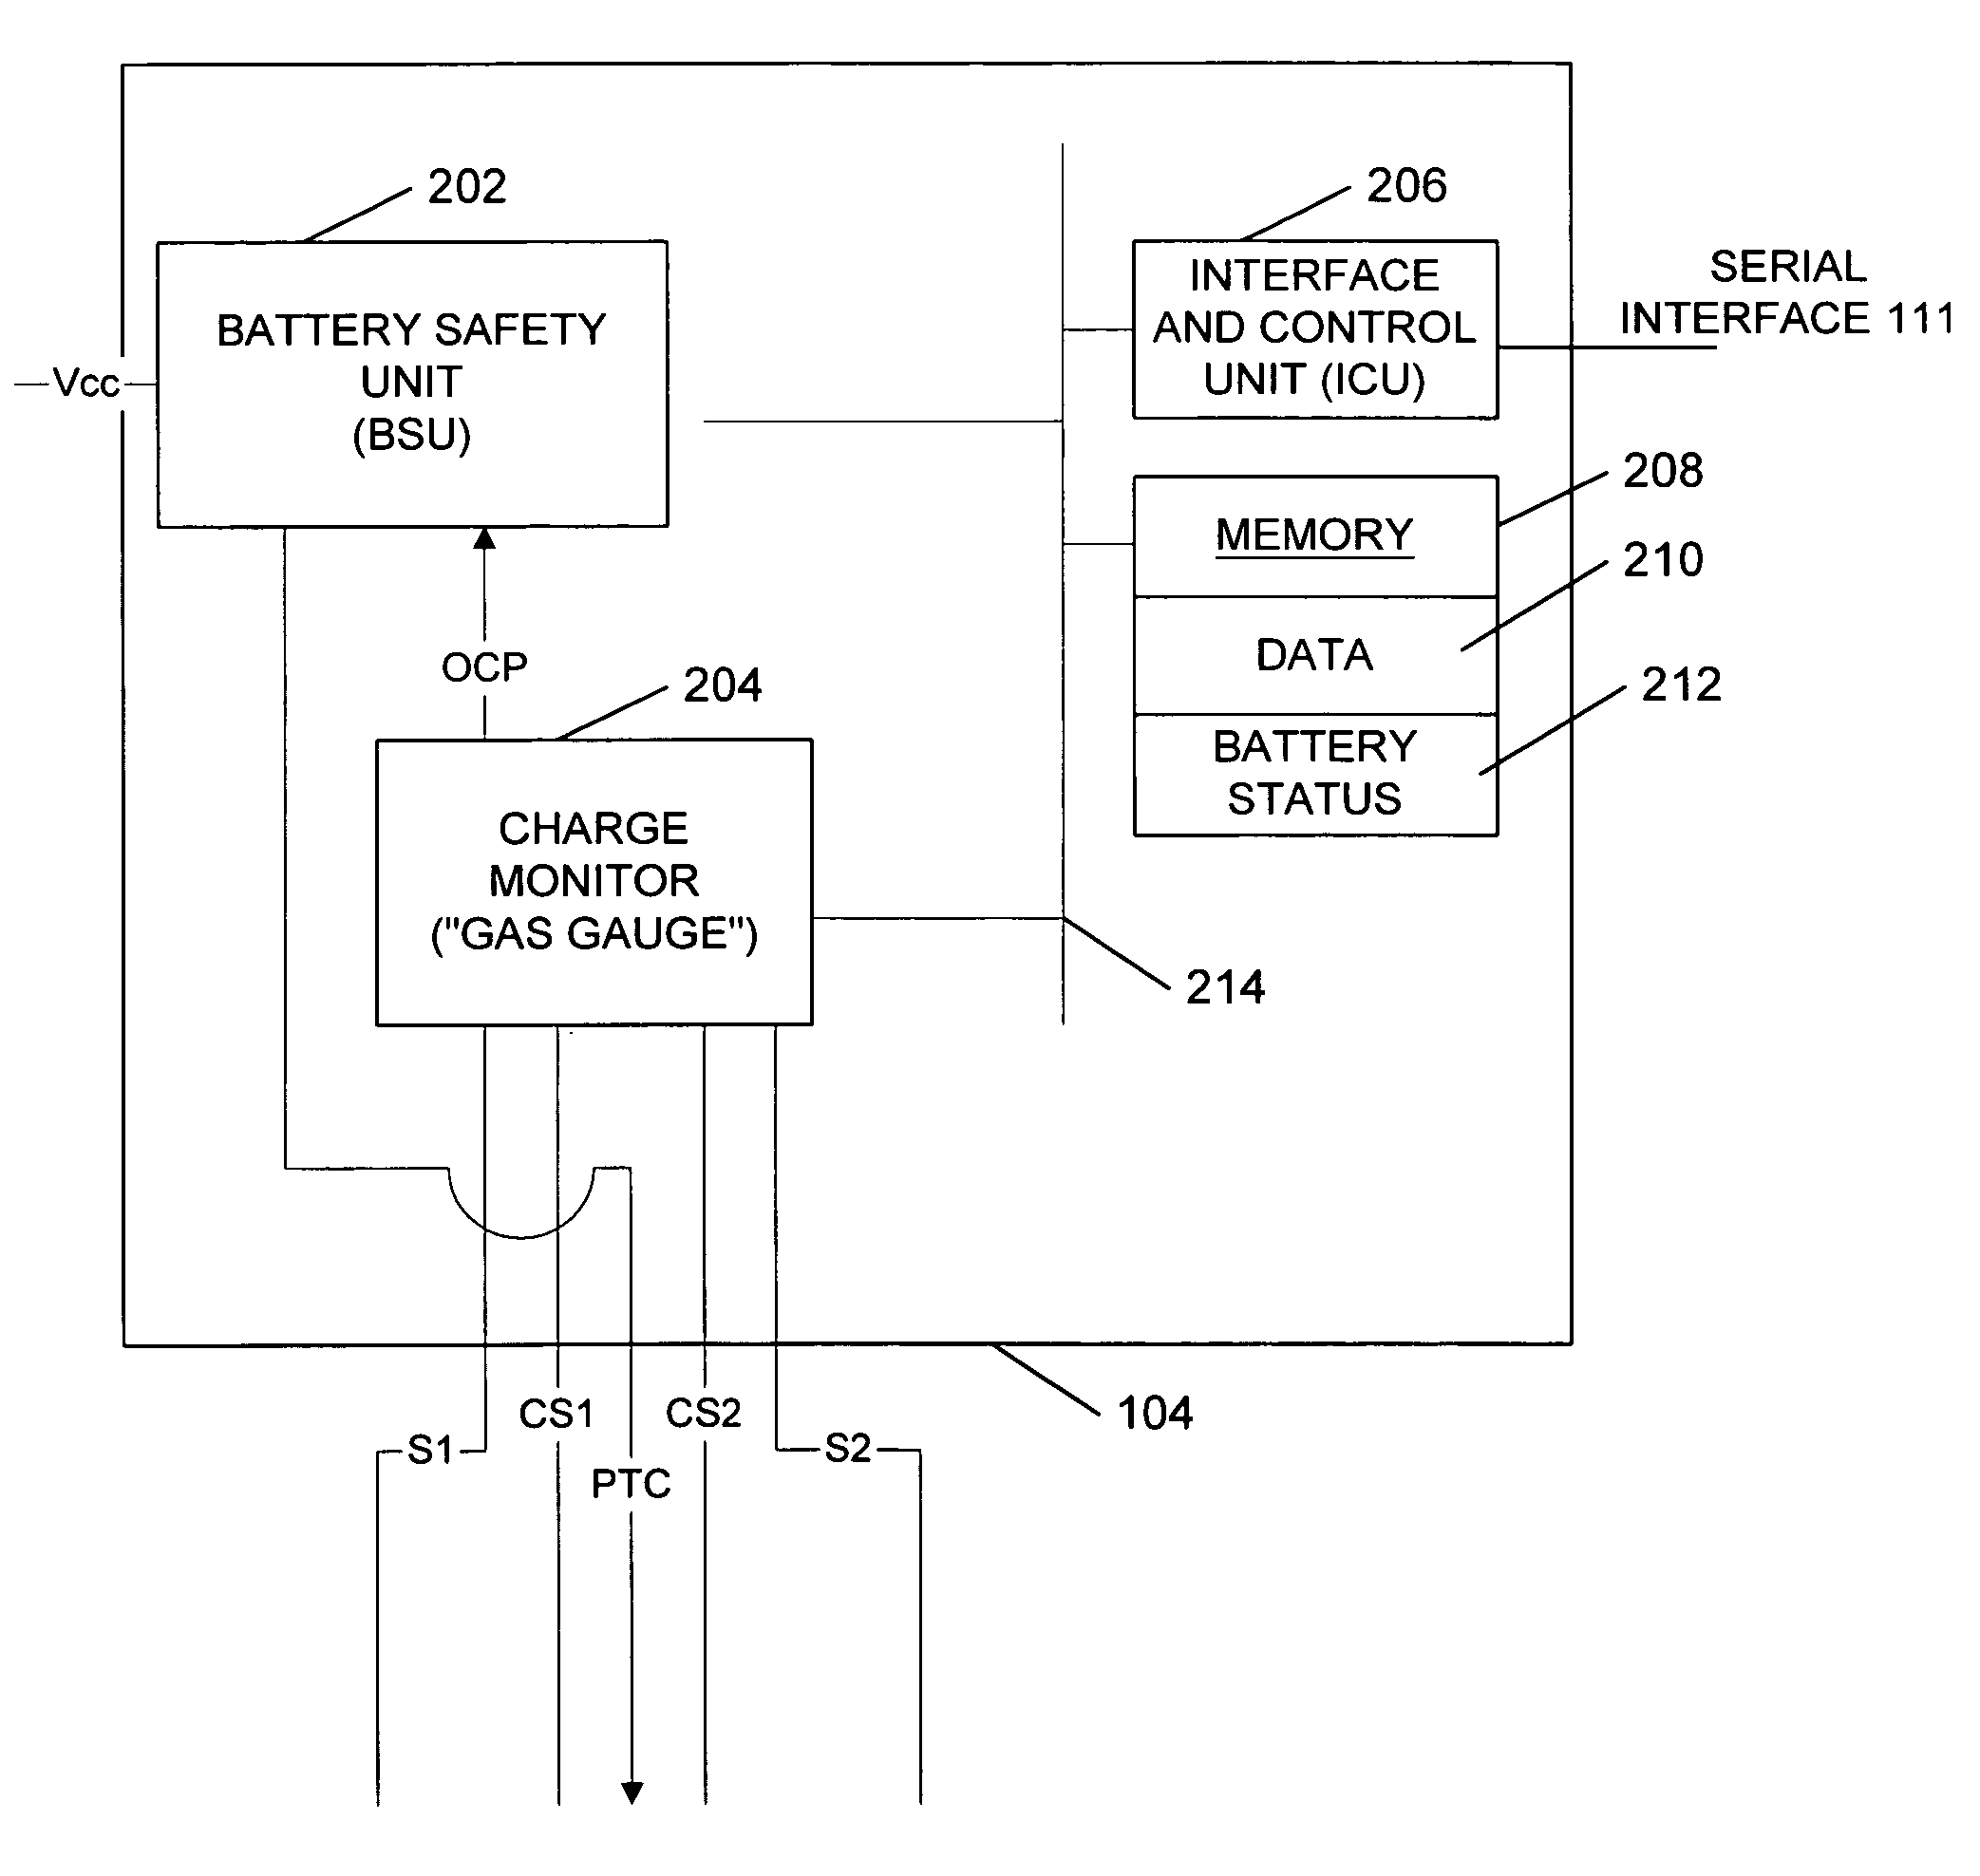 Serial interface for a battery management system